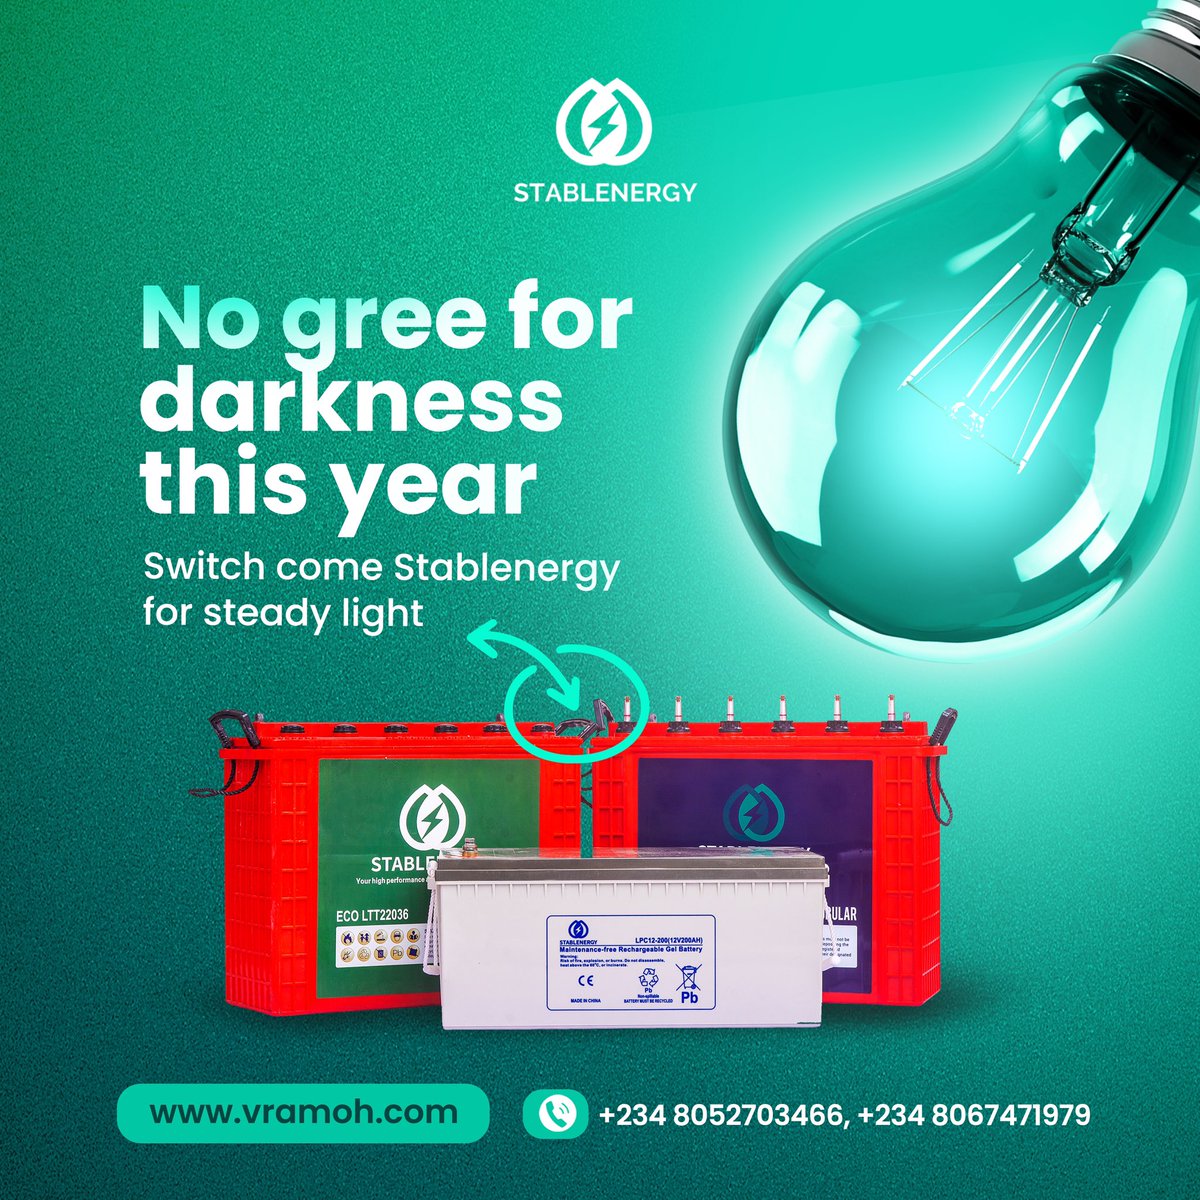 No gree for darkness this year #nogree #solarenergy #solarpower